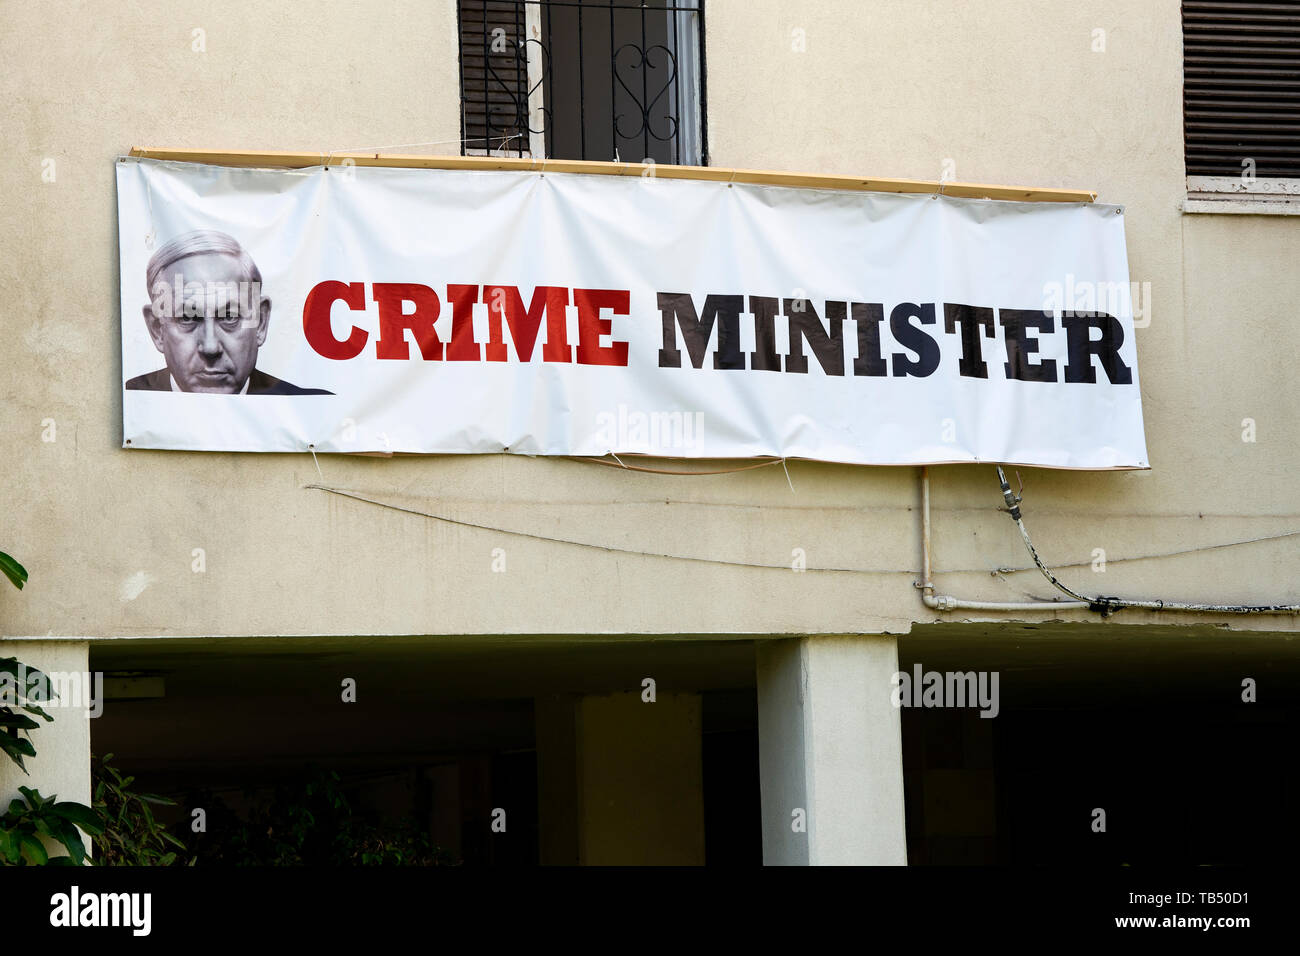 A banner depicting Israeli Prime Minister Benjamin Netanyahu as Crime Minister is seen in Tel Aviv, Israel. Netanyahu is facing fraud and bribery charges. Israel will hold a national election after Prime Minster Benjamin Netanyahu failed to build a coalition government with former Defense Minister, Avigdor Lieberman. Stock Photo